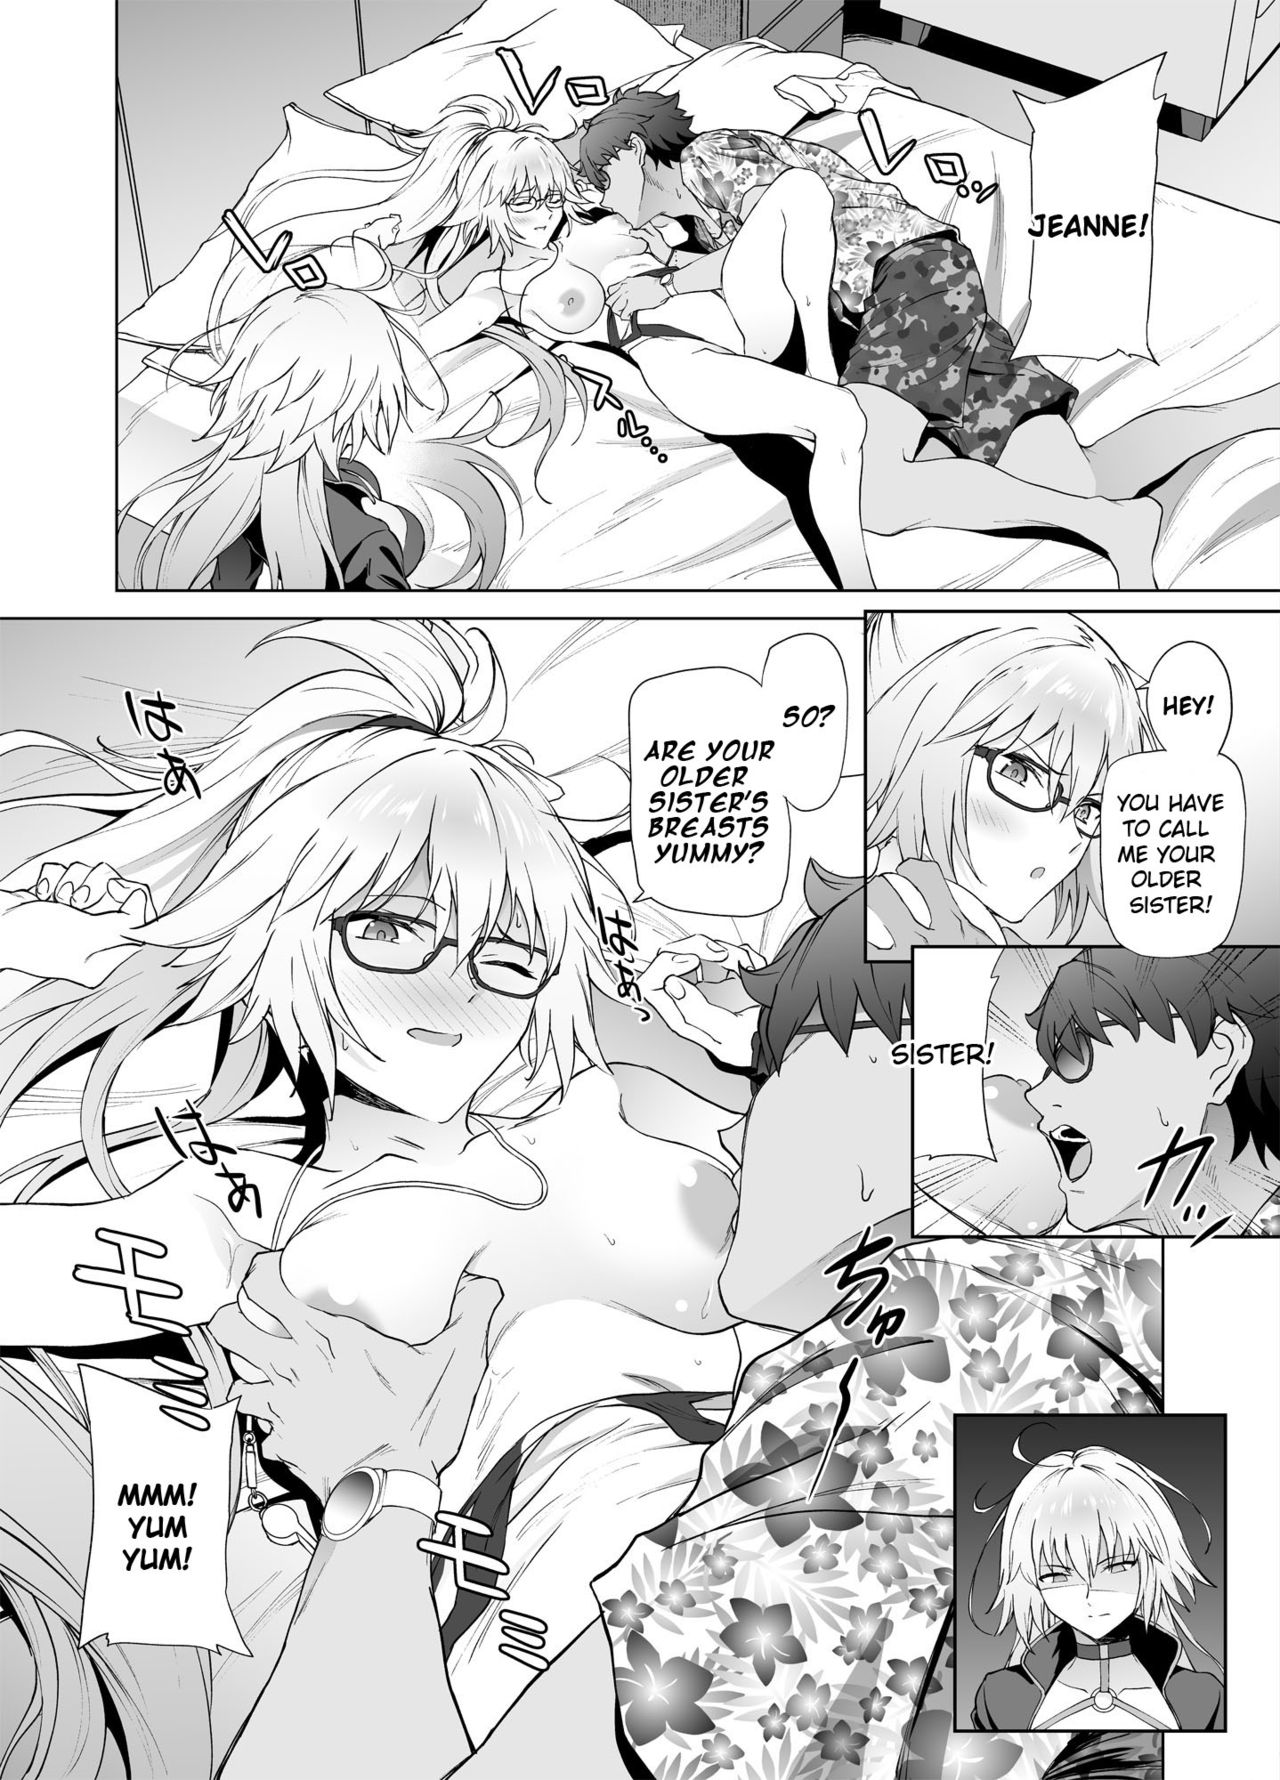 [EXTENDED PART (Endo Yoshiki)] Jeanne W (Fate/Grand Order) [Digital] (English) page 9 full